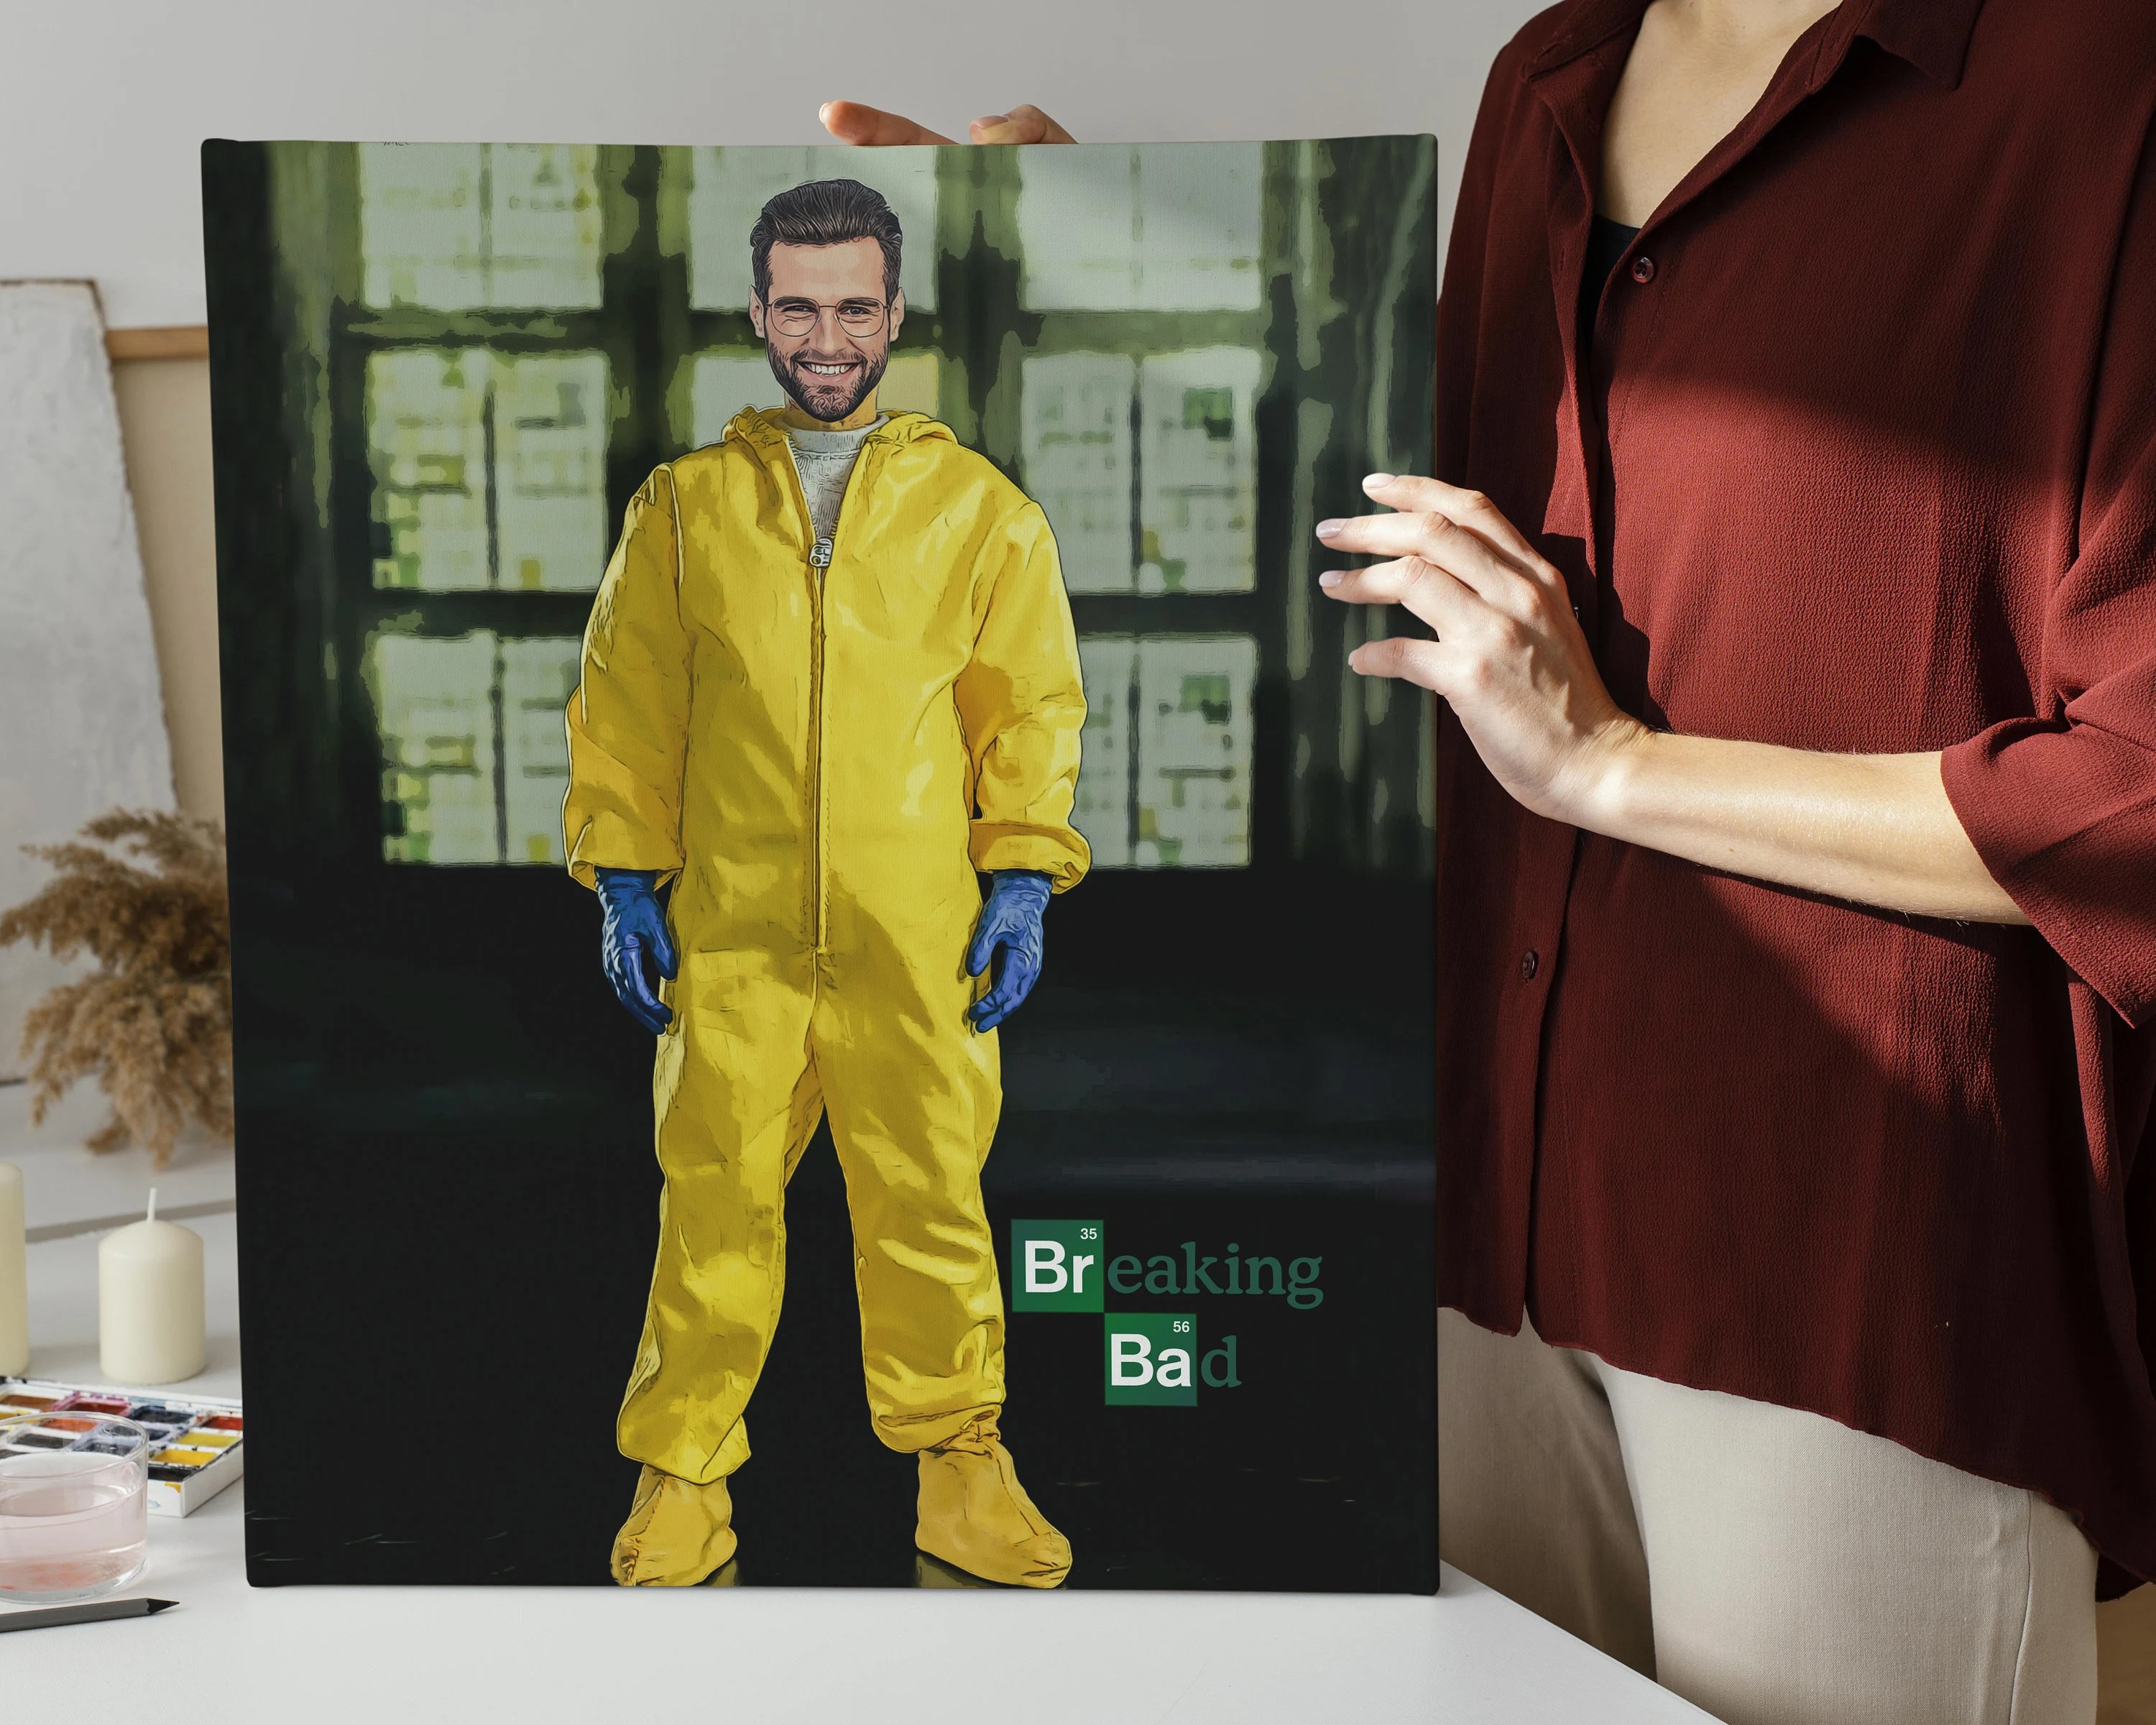 Heisenberg Custom Portrait, Get Your Own Breaking Bad Portrait from your photo, Digital File Only